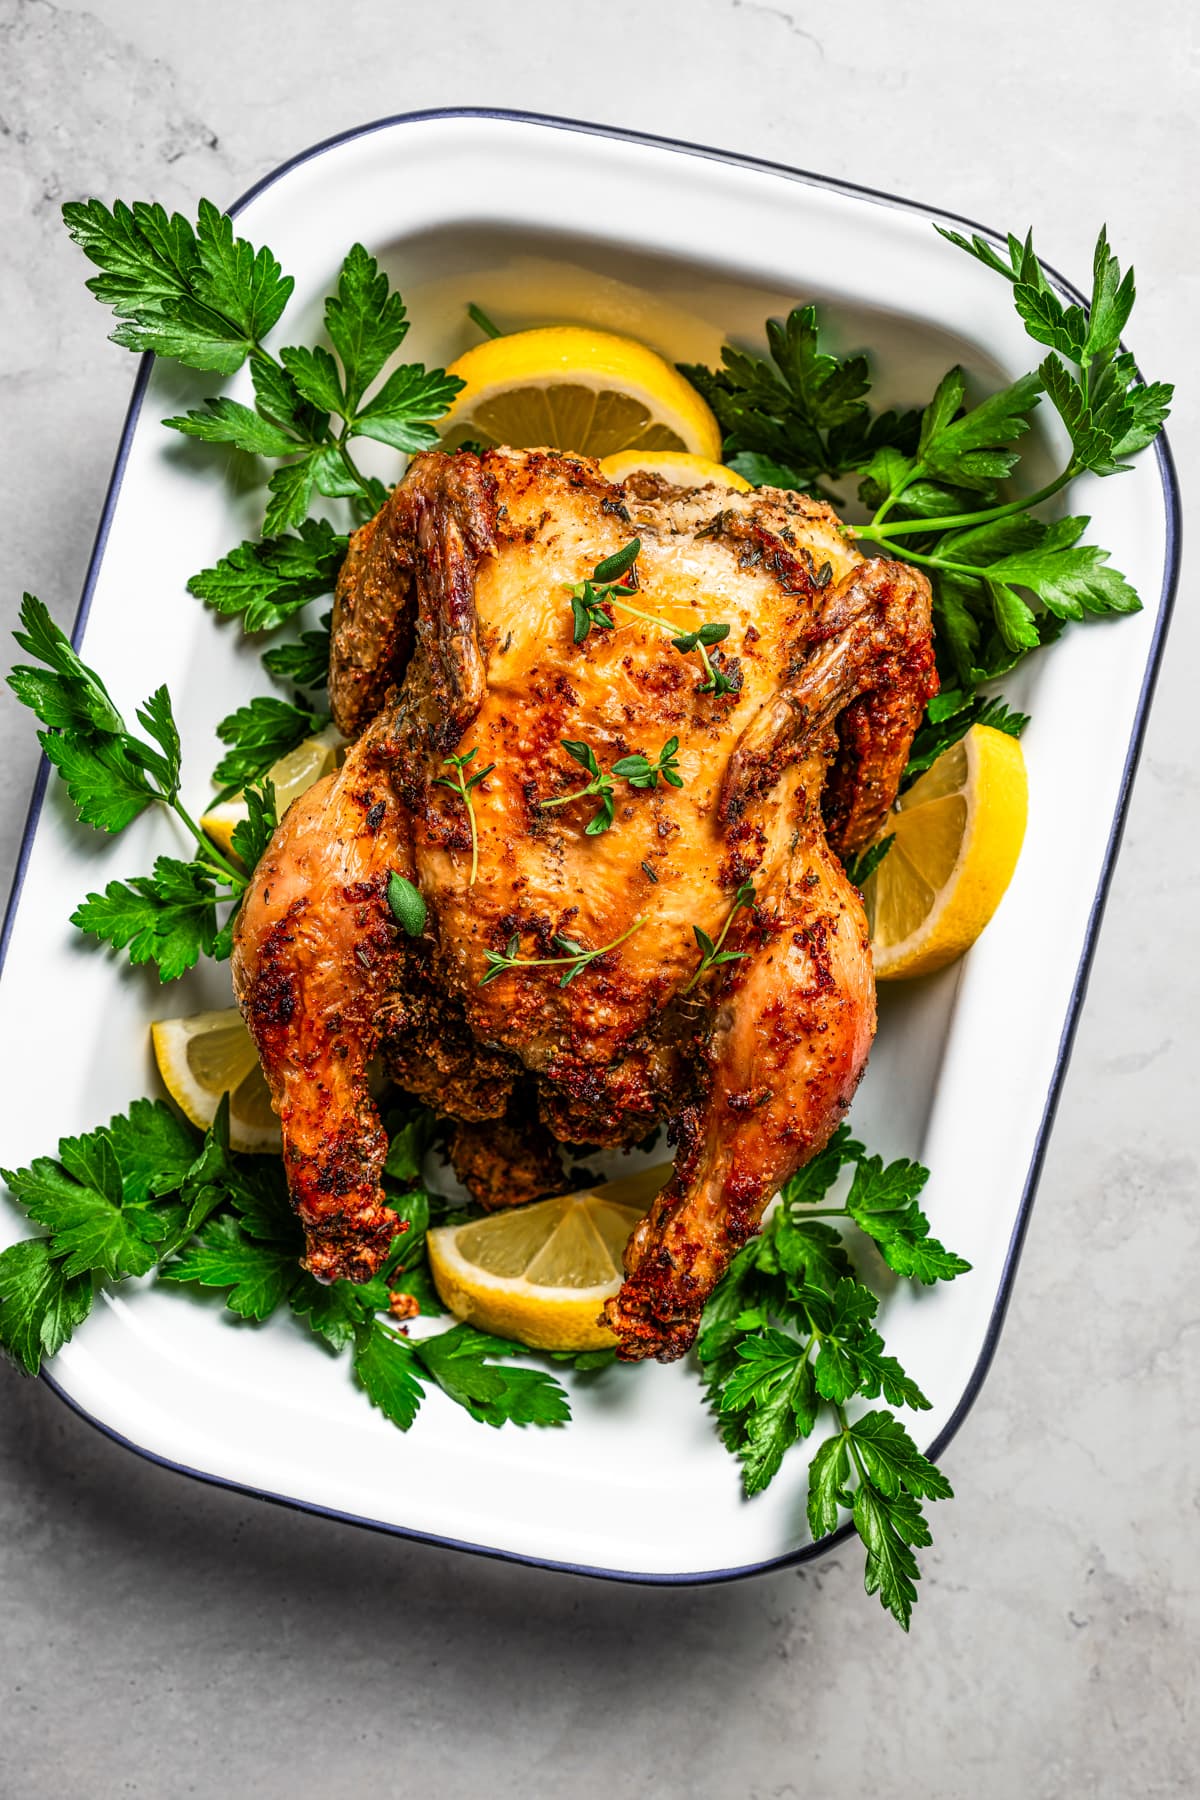 Overhead image of air fryer cornish game hen on a bed of fresh parsley. A fork and knife are at the ready nearby.